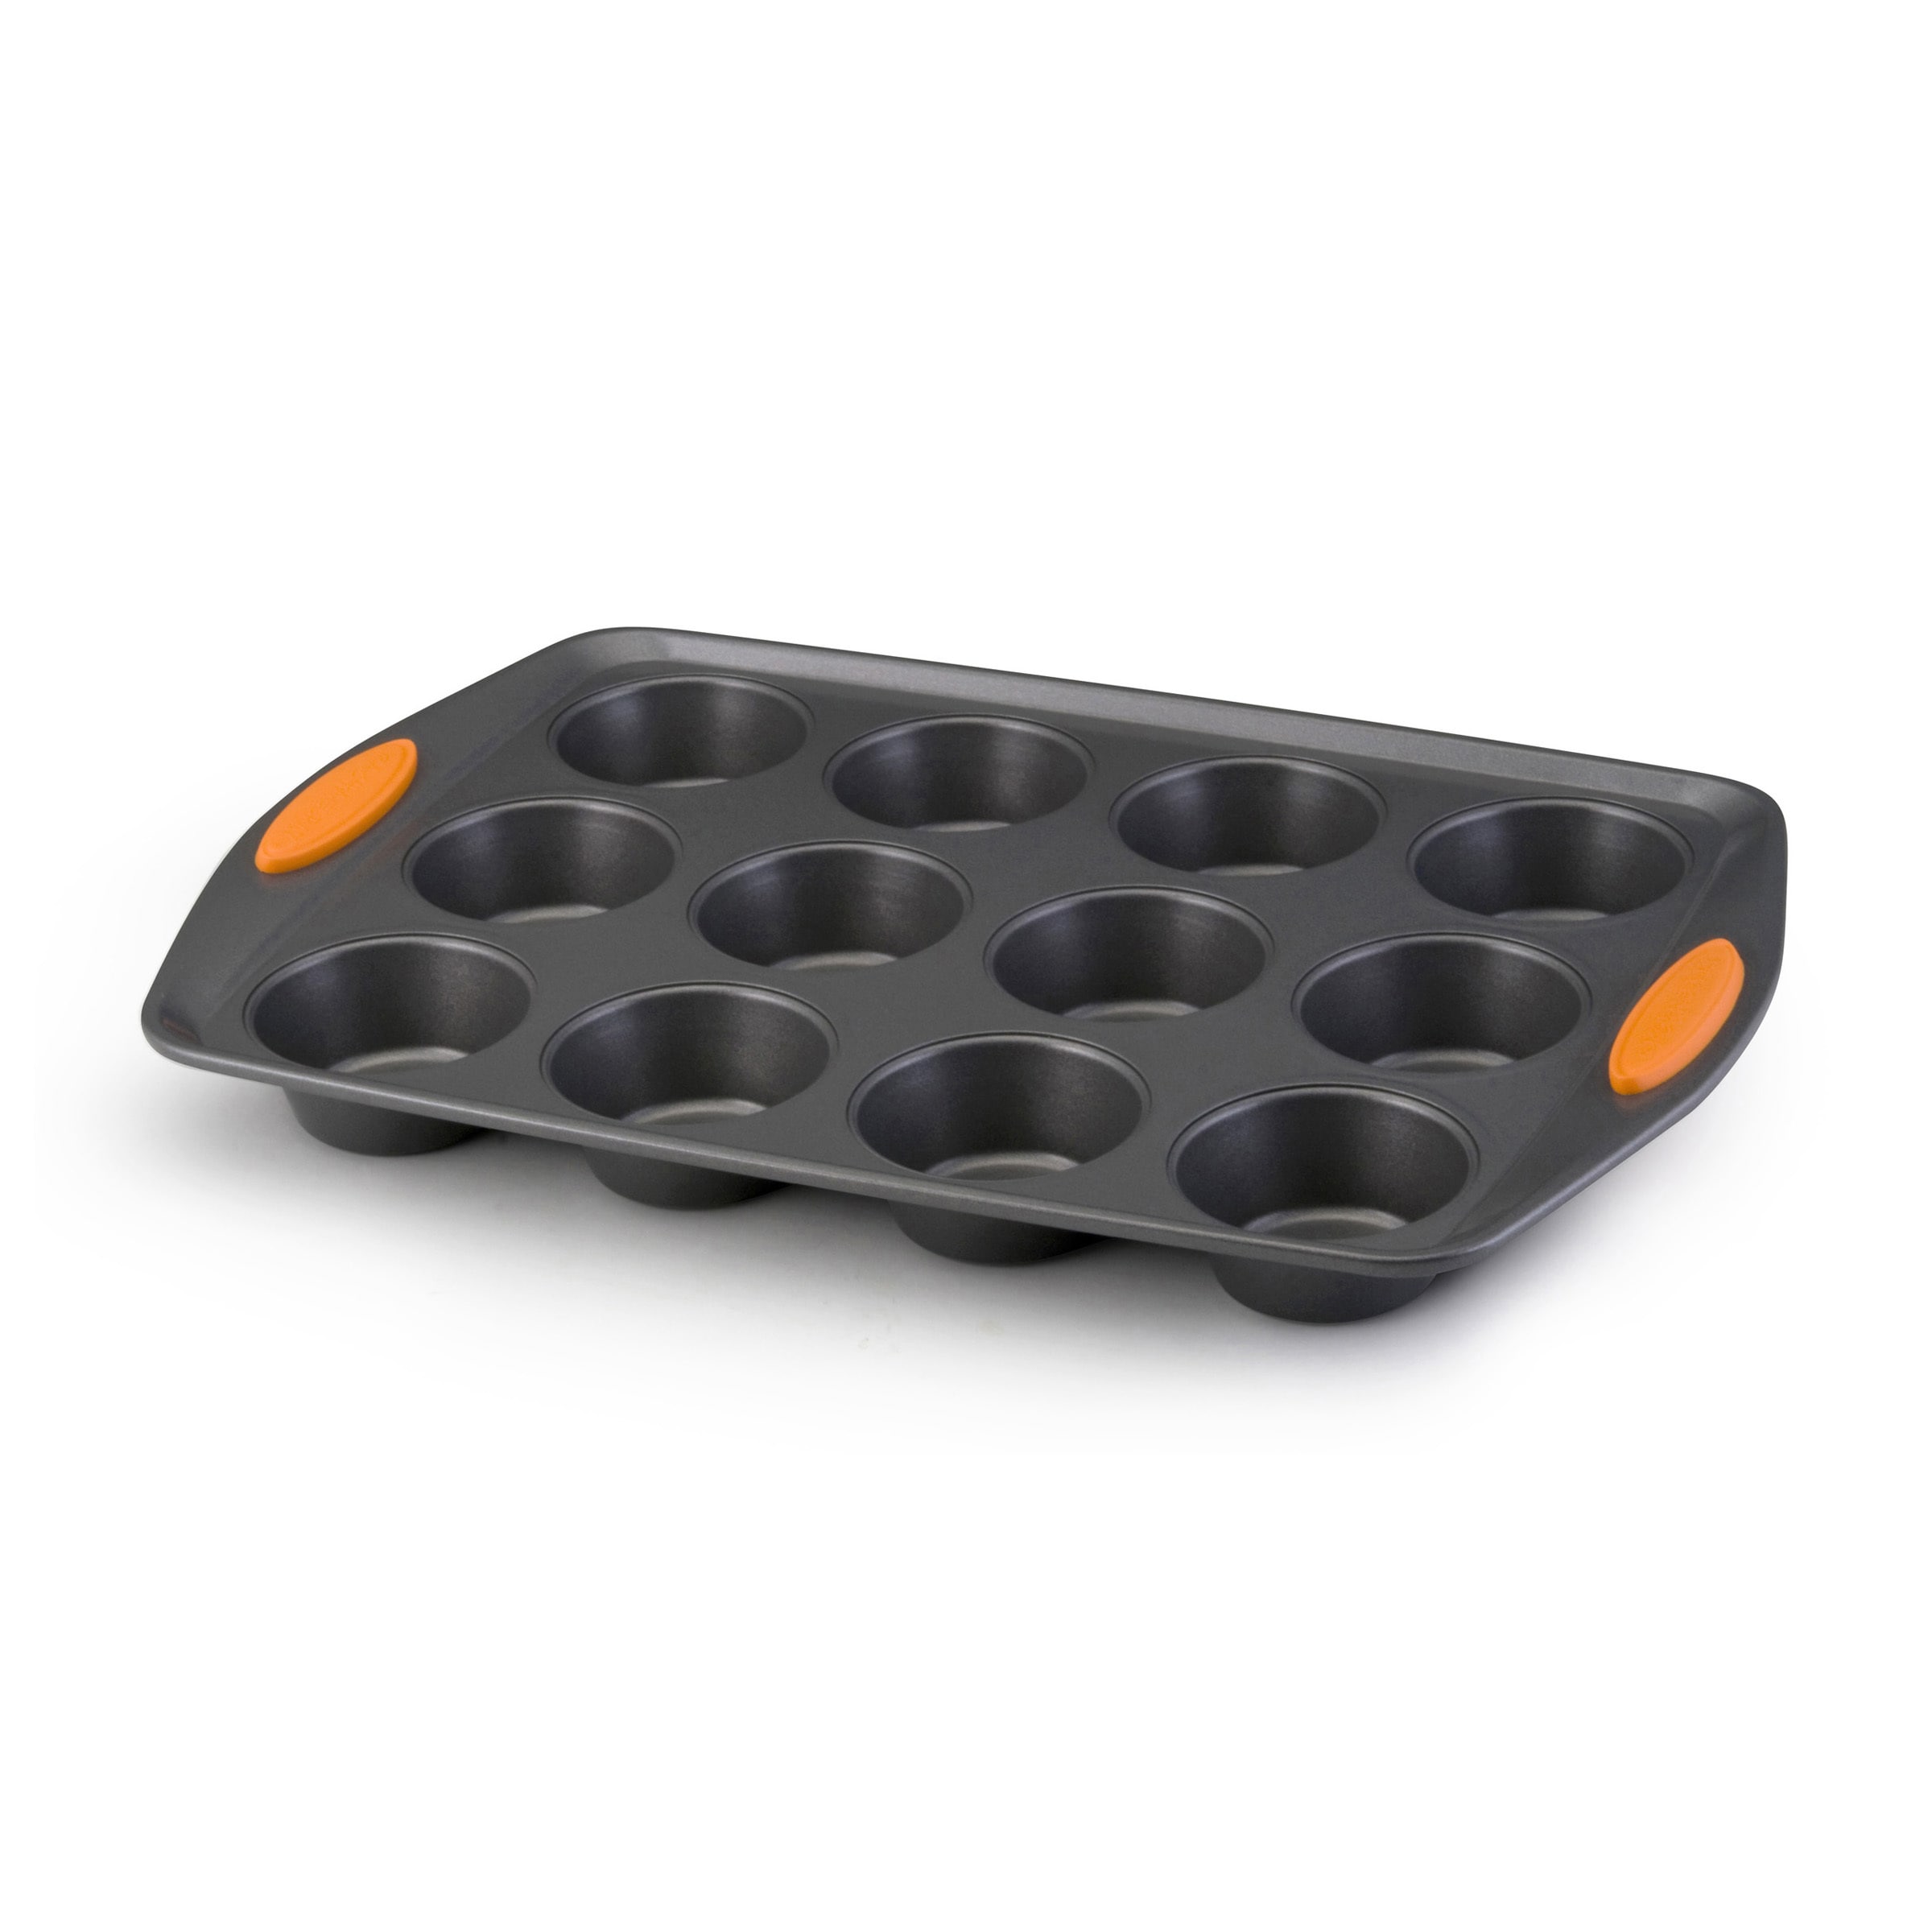 https://ak1.ostkcdn.com/images/products/7468671/Rachael-Ray-Yum-o-Grey-Carbon-Steel-and-Orange-Silicone-Handles-Nonstick-12-cup-Oven-Lovin-Muffin-and-Cupcake-Pan-Bakeware-167600b9-2d6b-4df1-8ae7-a2b95e6d5ab1.jpg